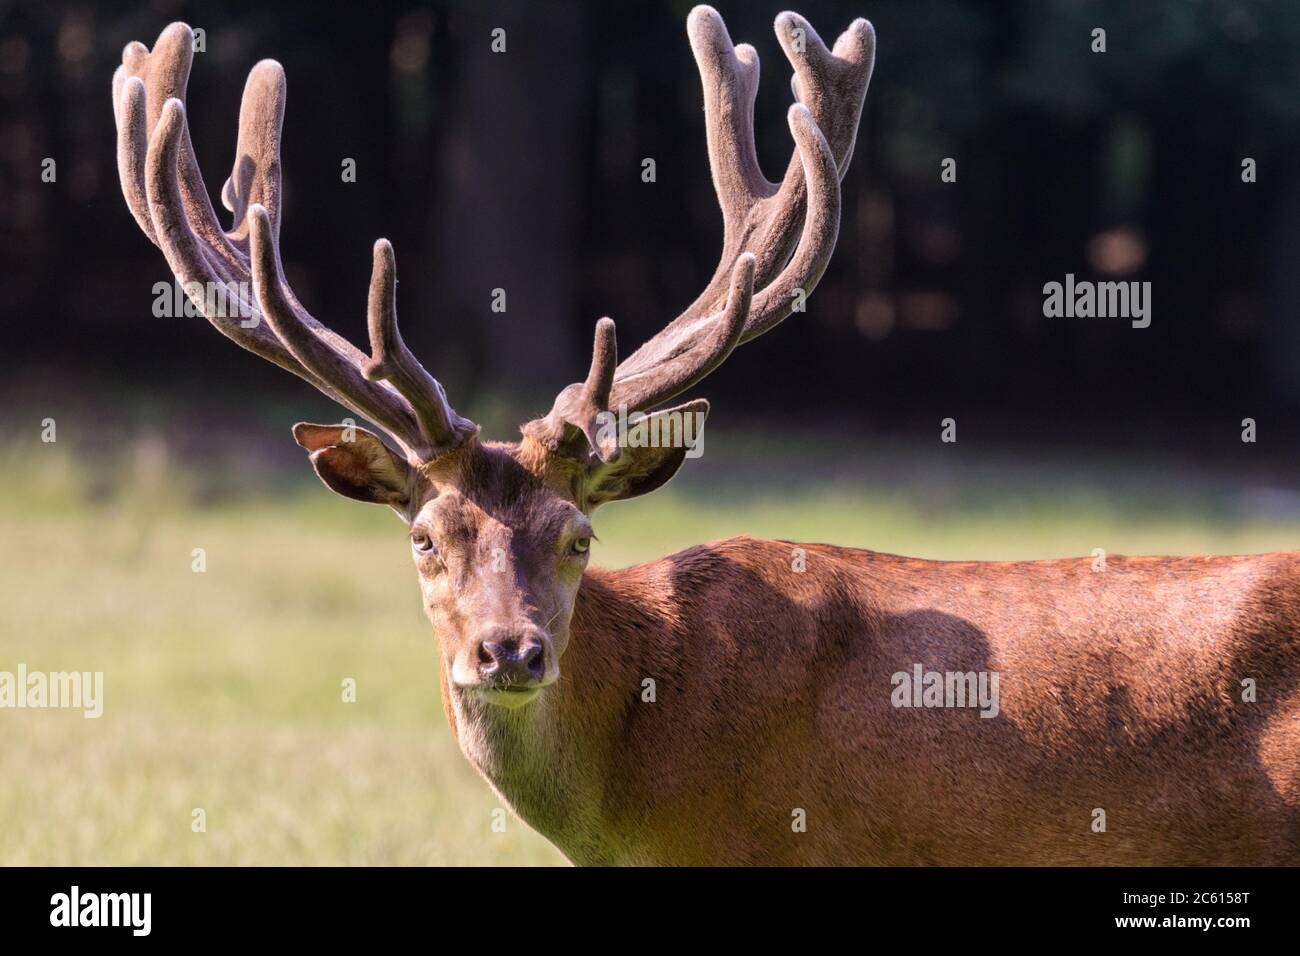 Red deer (cervus elaphus) stag (male) with impressive antlers in natural environment grass and woodland, Germany Stock Photo